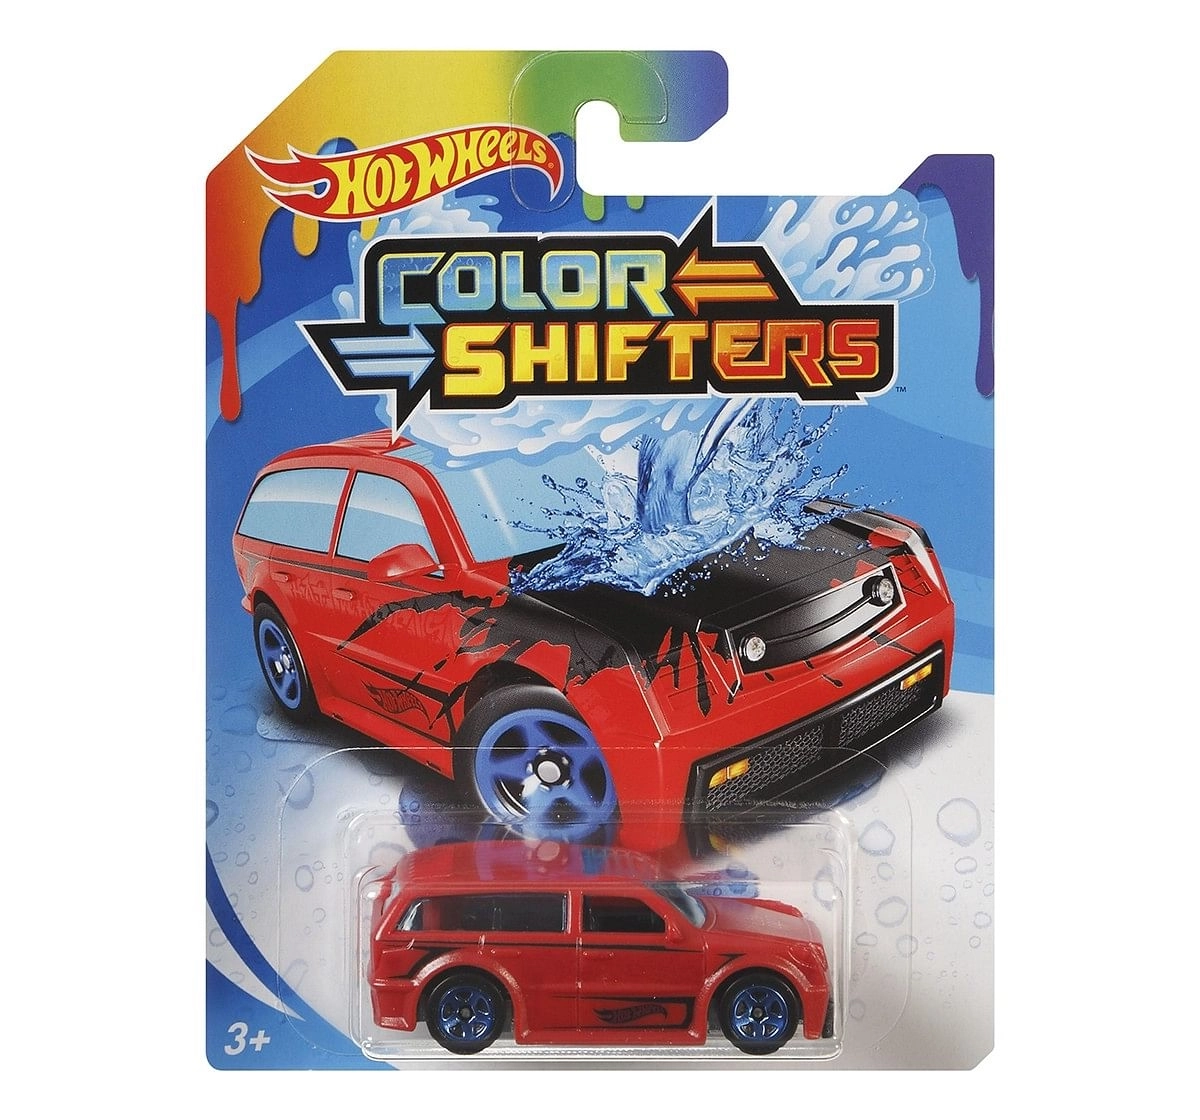 Hot Wheels 1:64 Color Shifters Vehicles for Boys age 3Y+, Assorted